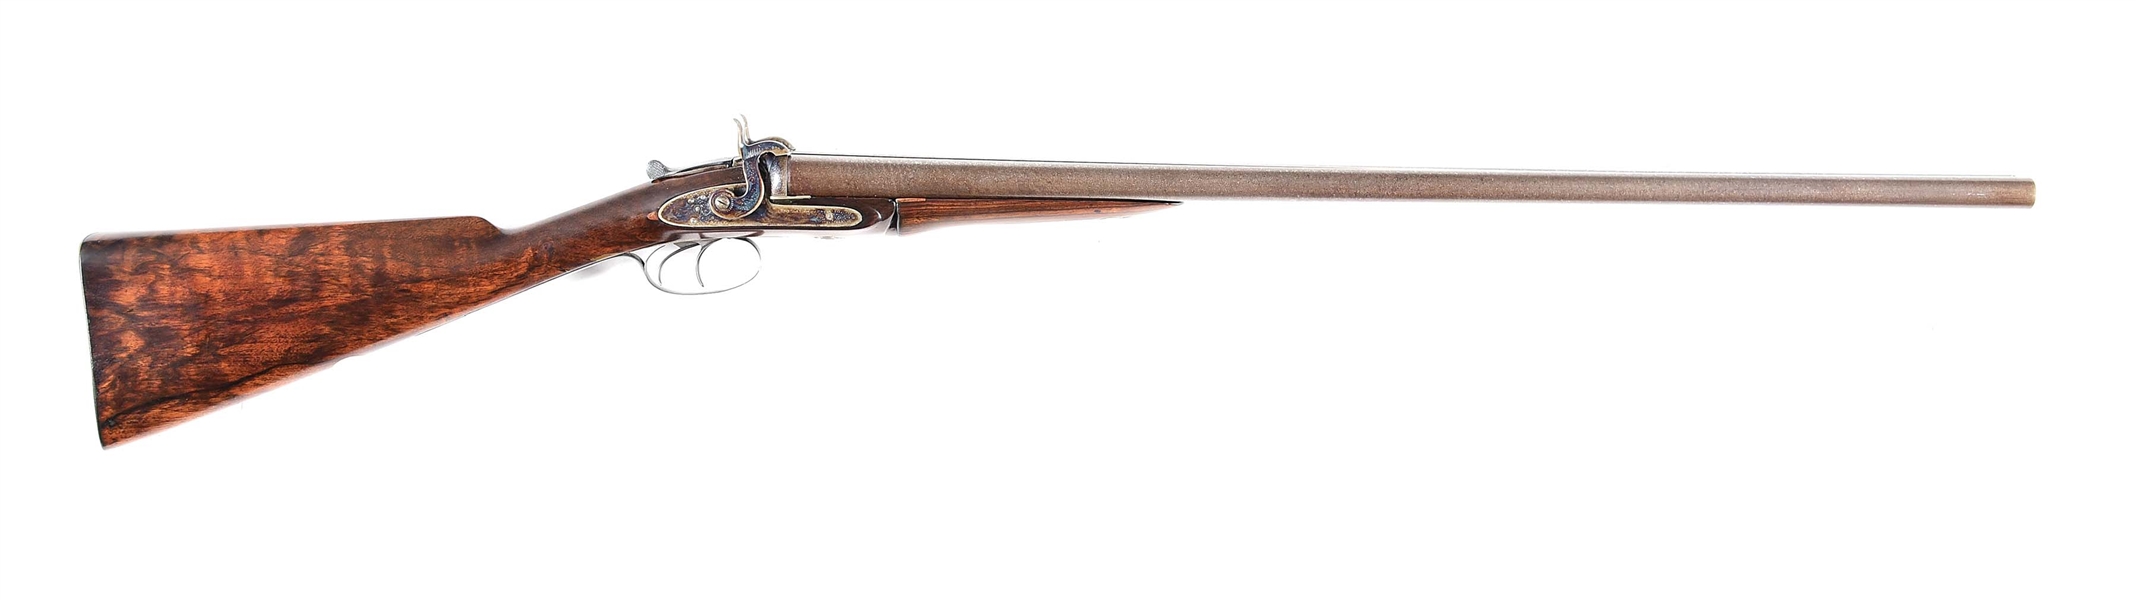 (A) WESTLEY RICHARDS 1871 PATENT SIDE BY SIDE HAMMER FIRED 12 BORE SHOTGUN, CONVERTED FROM PINFIRE.